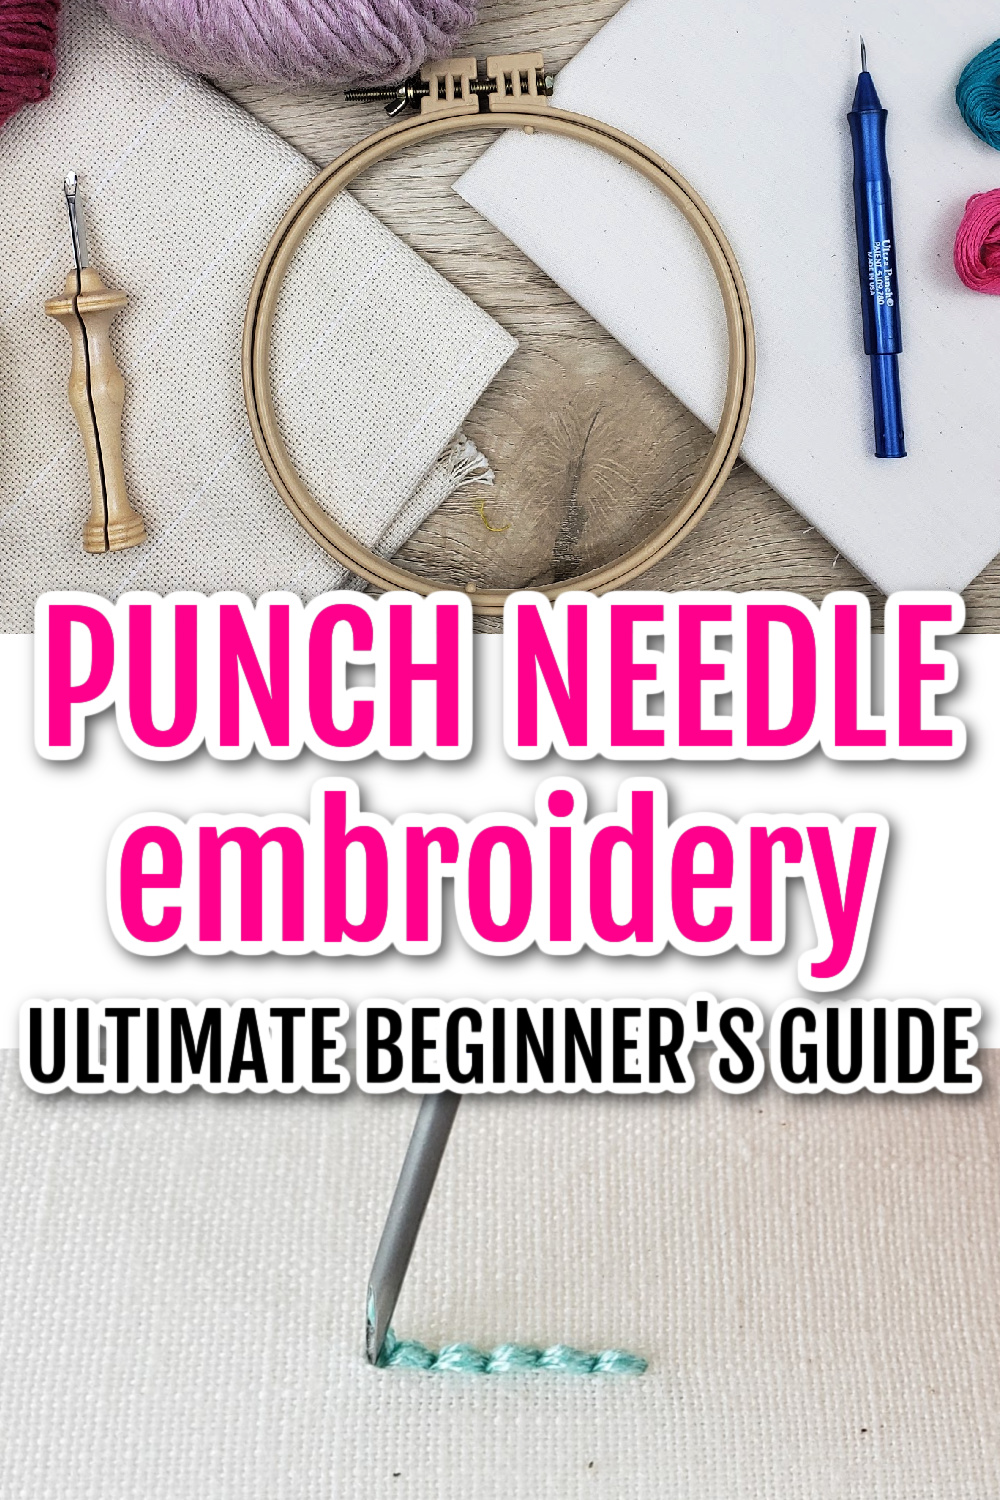 How to Use a Punch Embroidery Pen! Basic Tutorial and Review -    Embroidery stitches tutorial, Punch needle embroidery, Hand embroidery  stitches